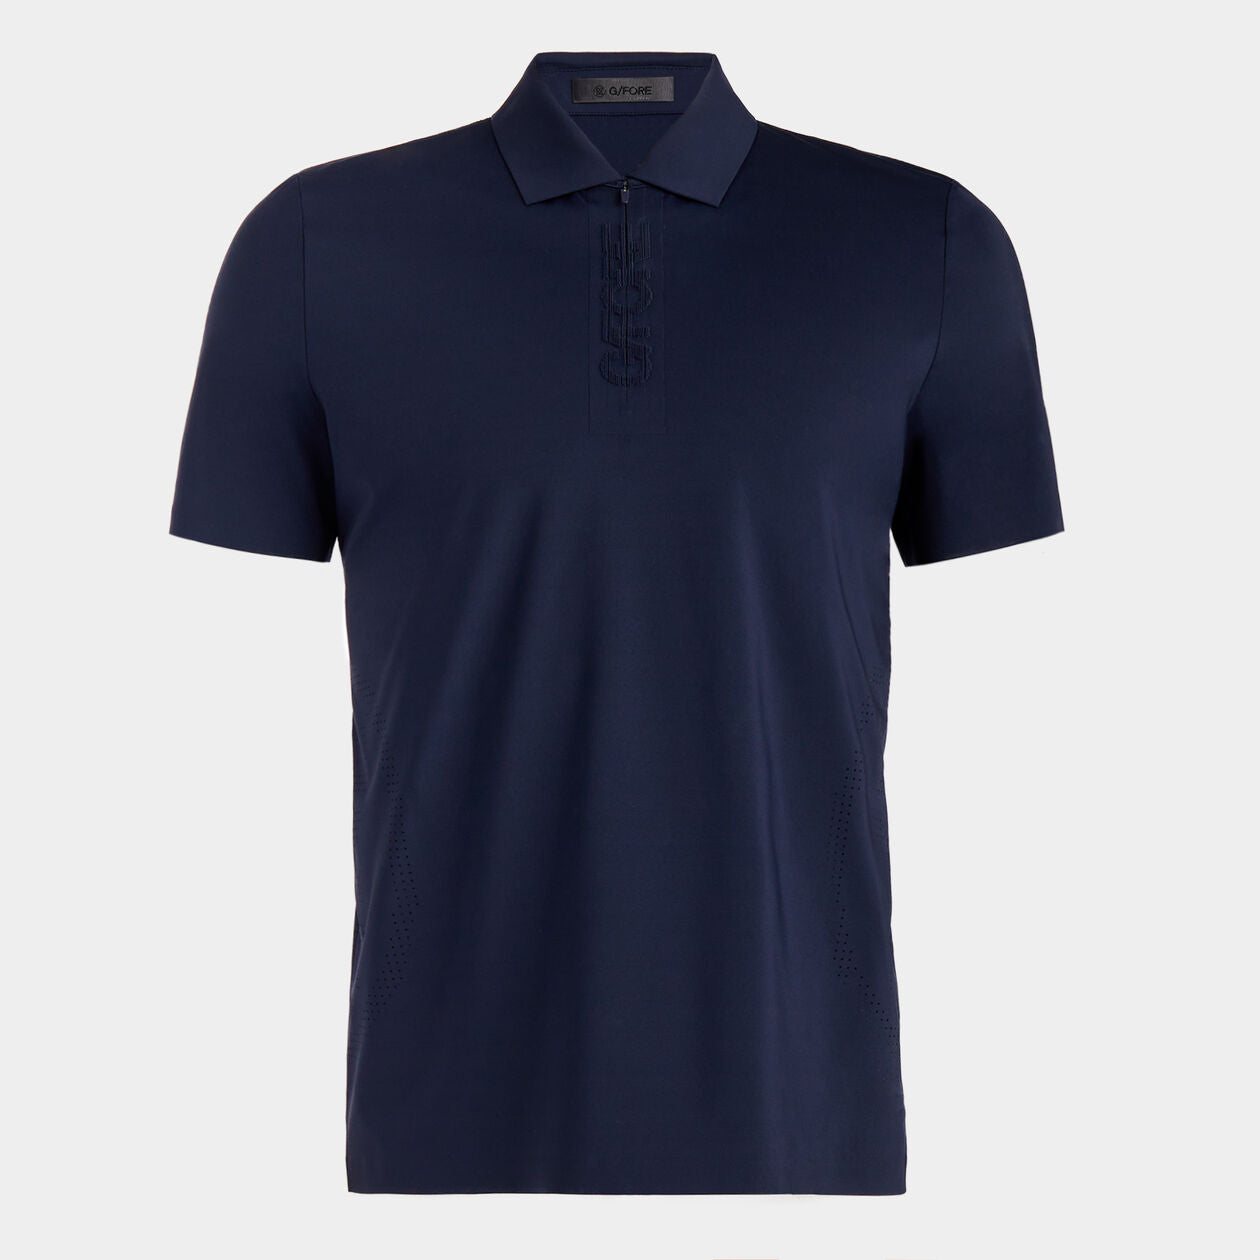 Navy Tech Perforated Circle G's Polo - Twlt | G/Fore